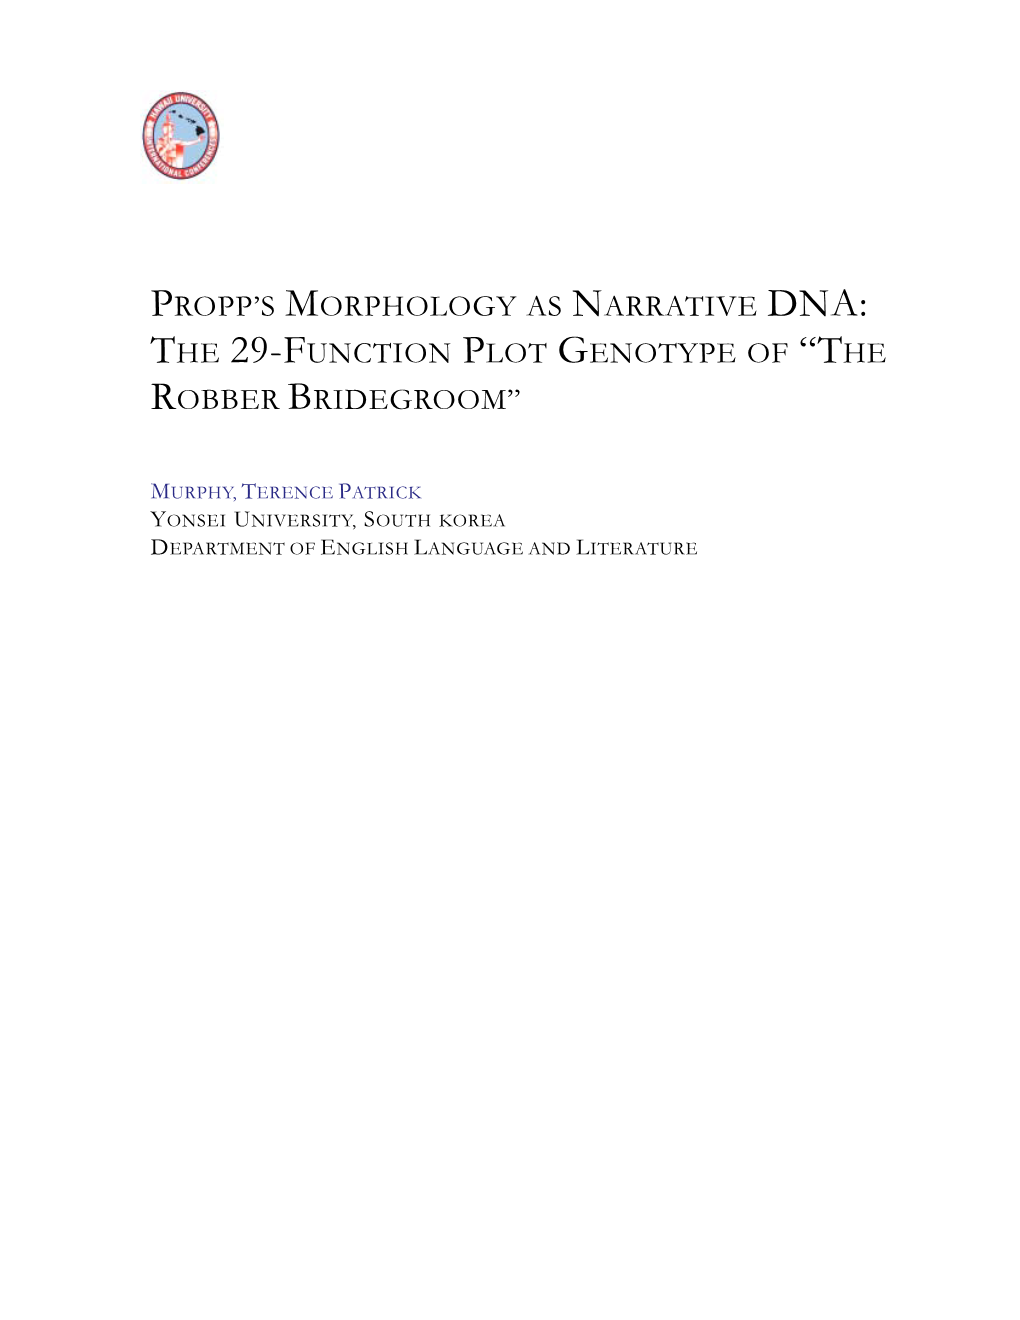 Propp's Morphology As Narrative DNA: the 29-Function Plot Genotype of “The Robber Bridegroom”